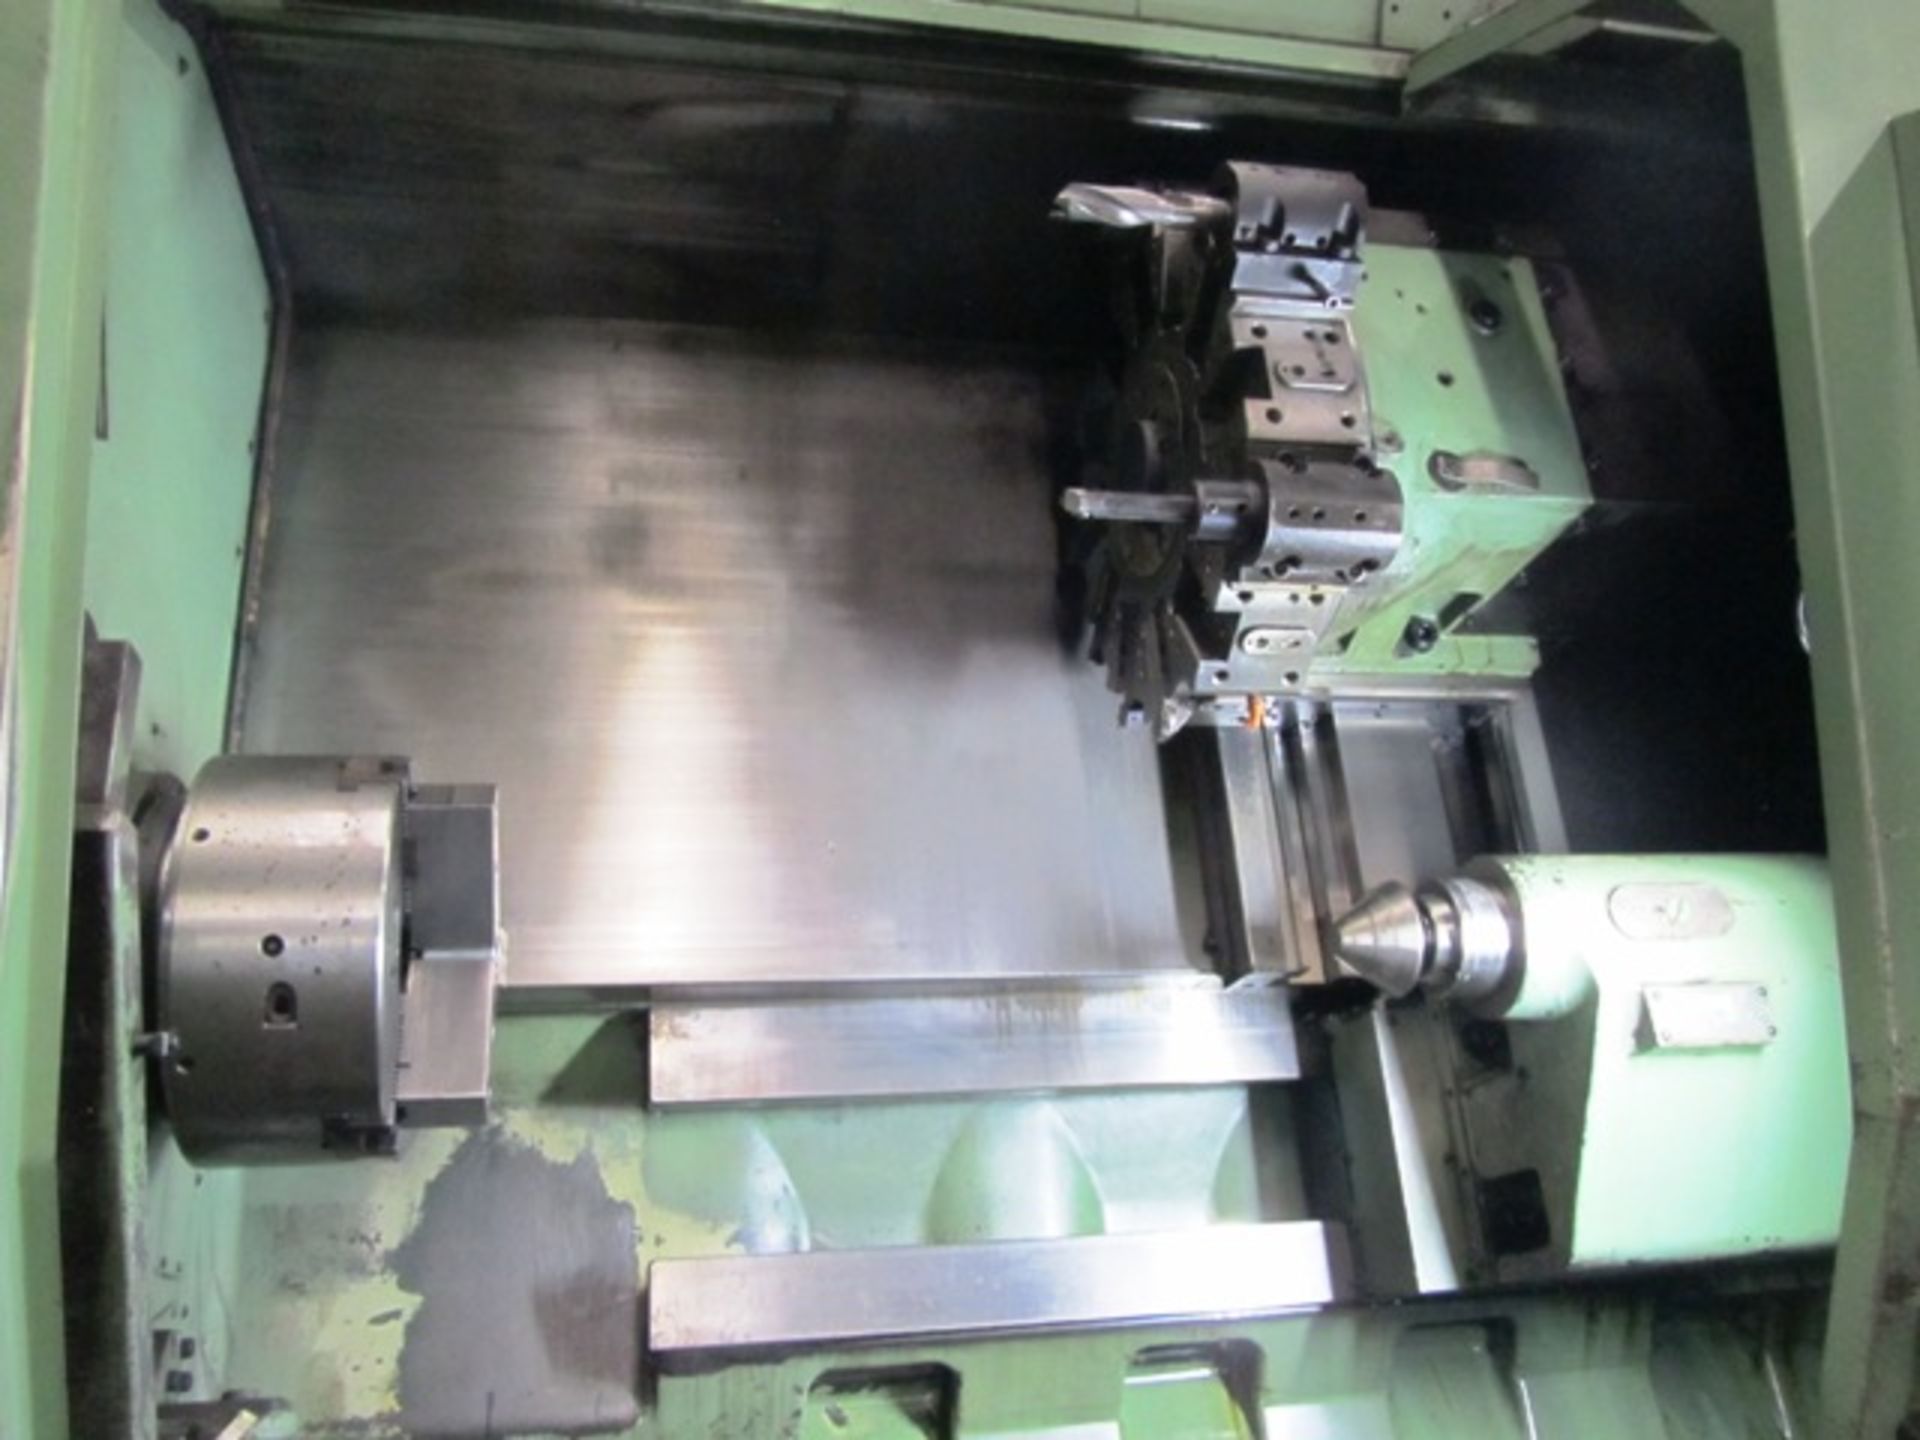 Mori Seiki SL-45B/1000 CNC Turning Center with 15'' 3-Jaw Chuck, 26.4'' Swing Over Bed, 46.5'' - Image 4 of 4